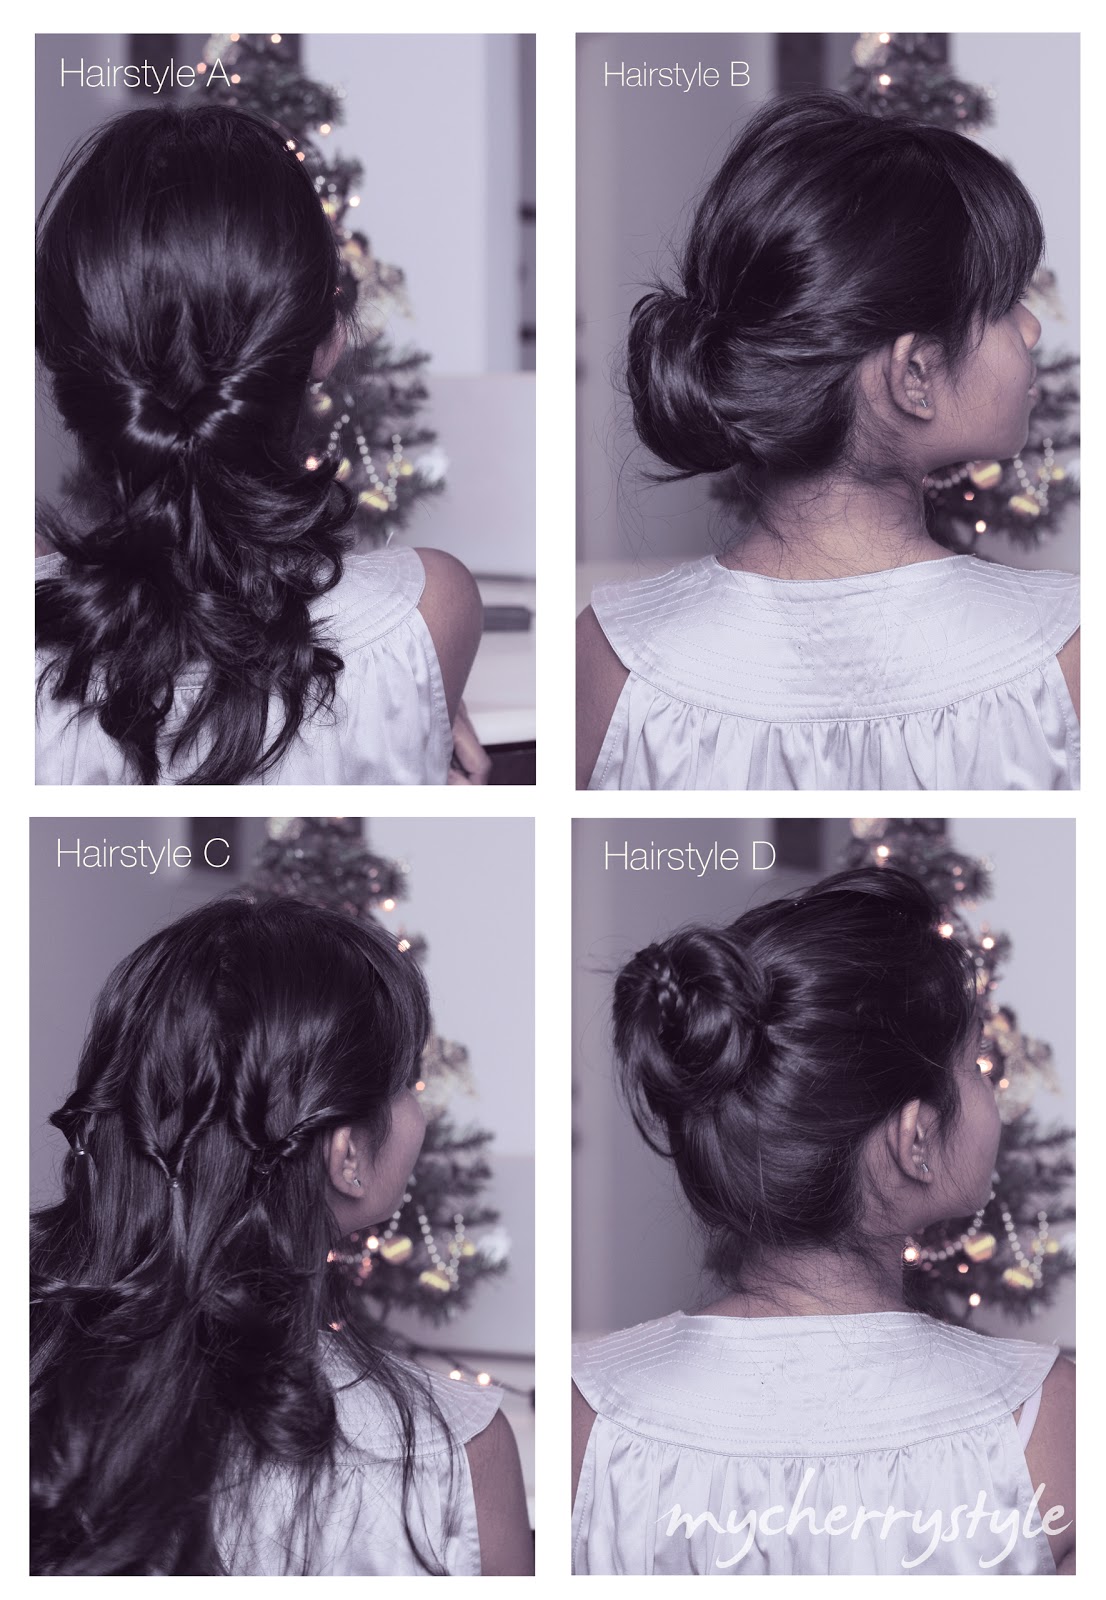 4-Strand French Braid | Easy Hairstyles - Cute Girls Hairstyles